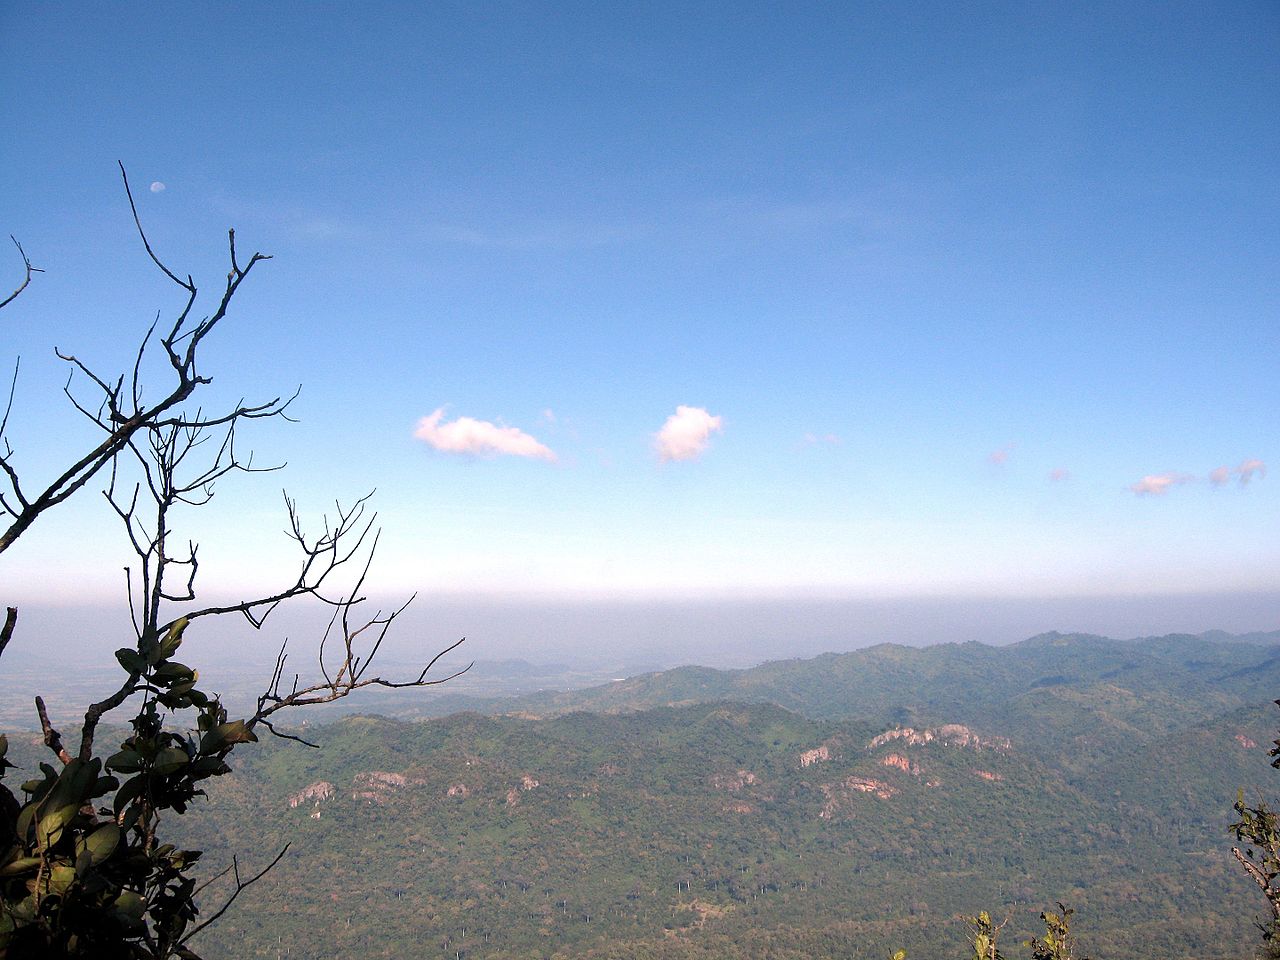 View of mountains and forests in Chaiyaphum province.